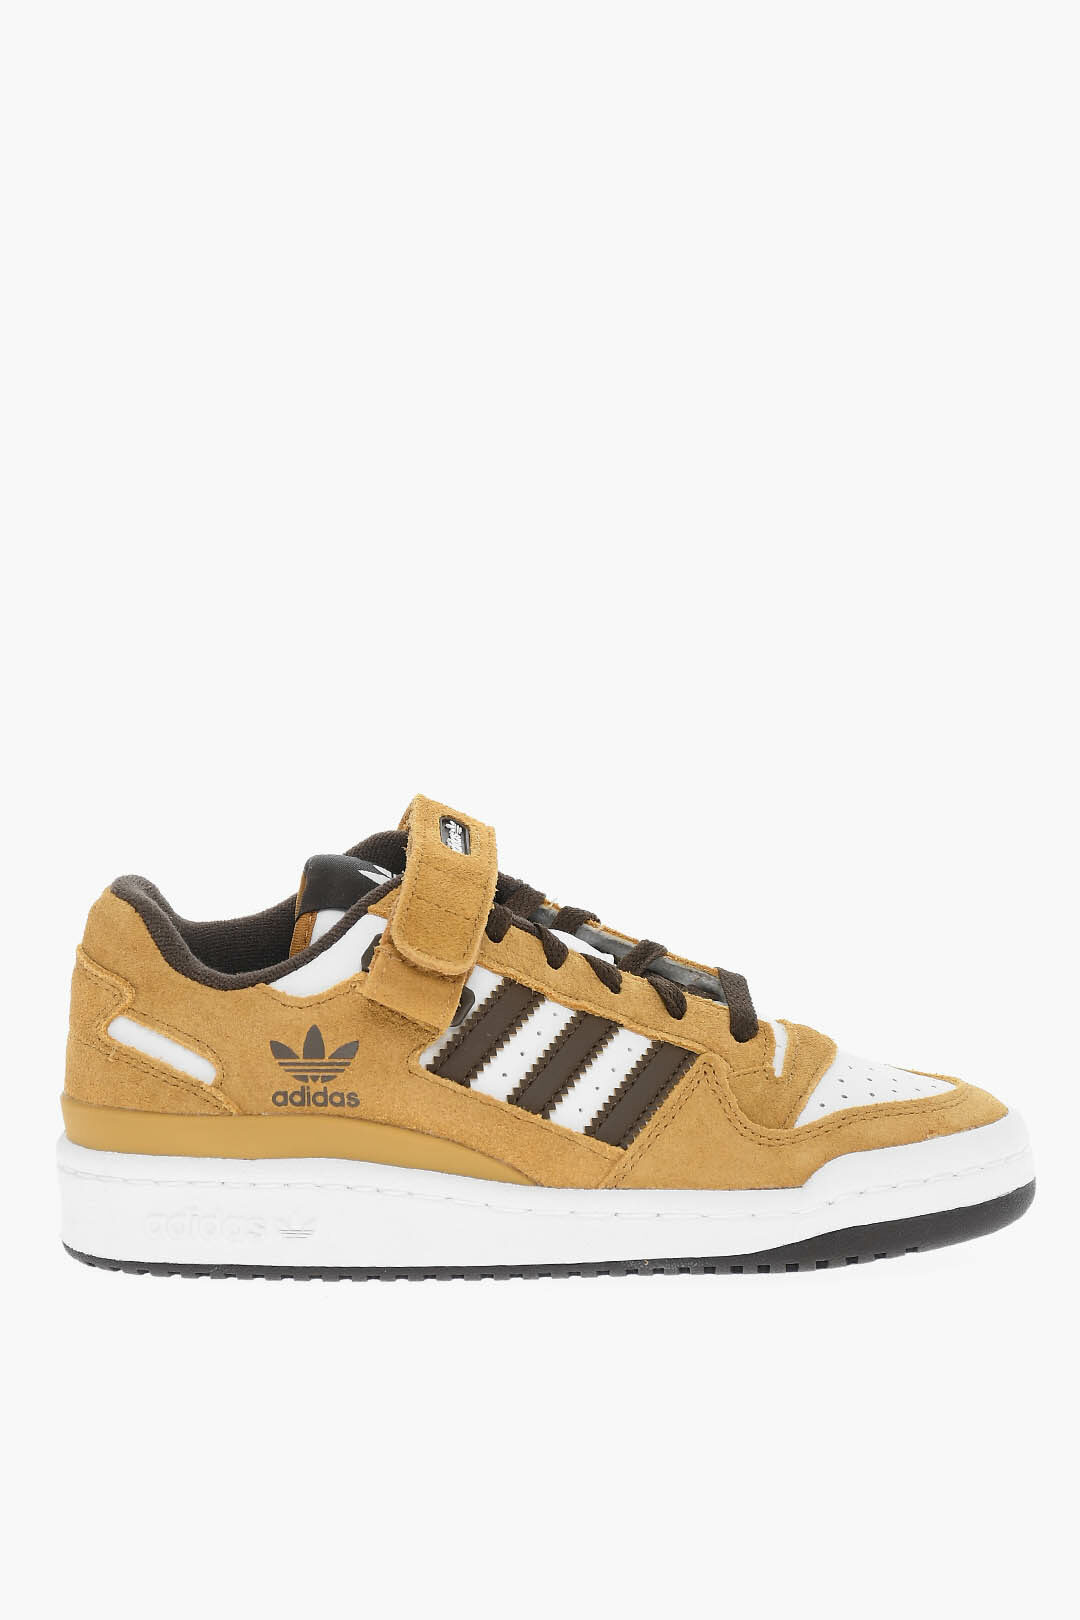 viernes Enviar Absorbente Adidas Suede Leather FORUM Low-Top Sneakers men - Glamood Outlet